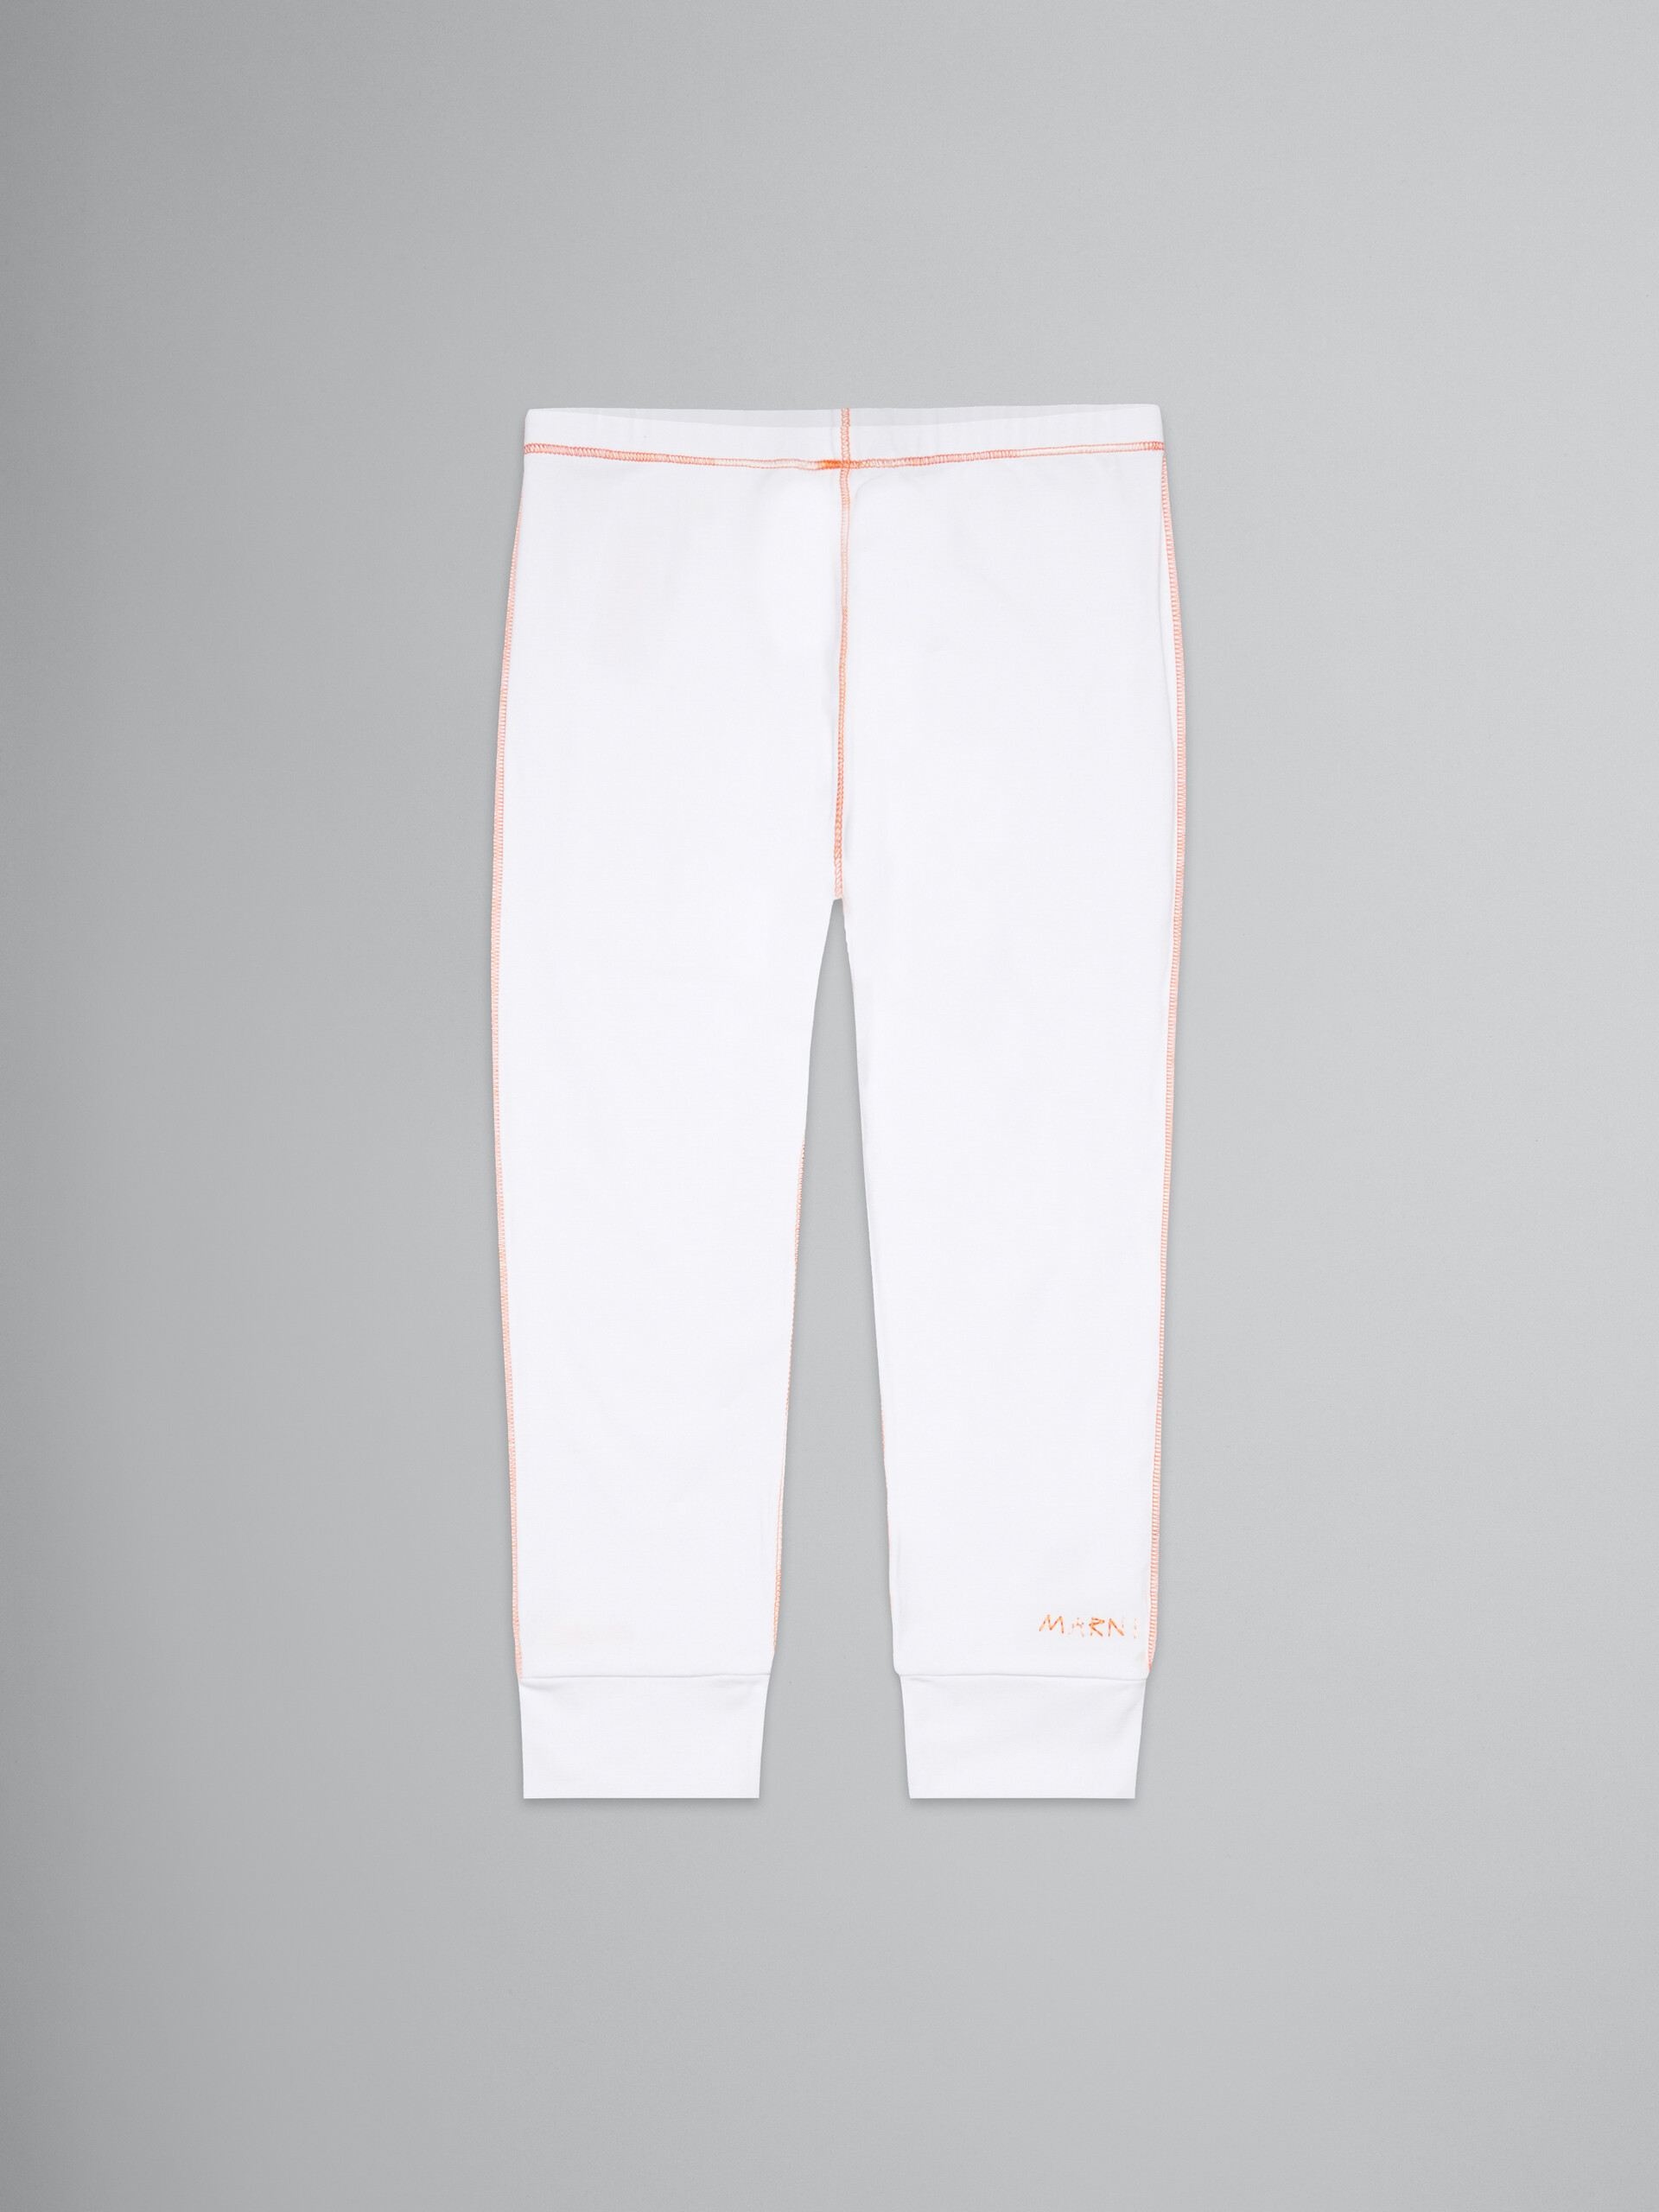 Whitw leggings pants with stitching